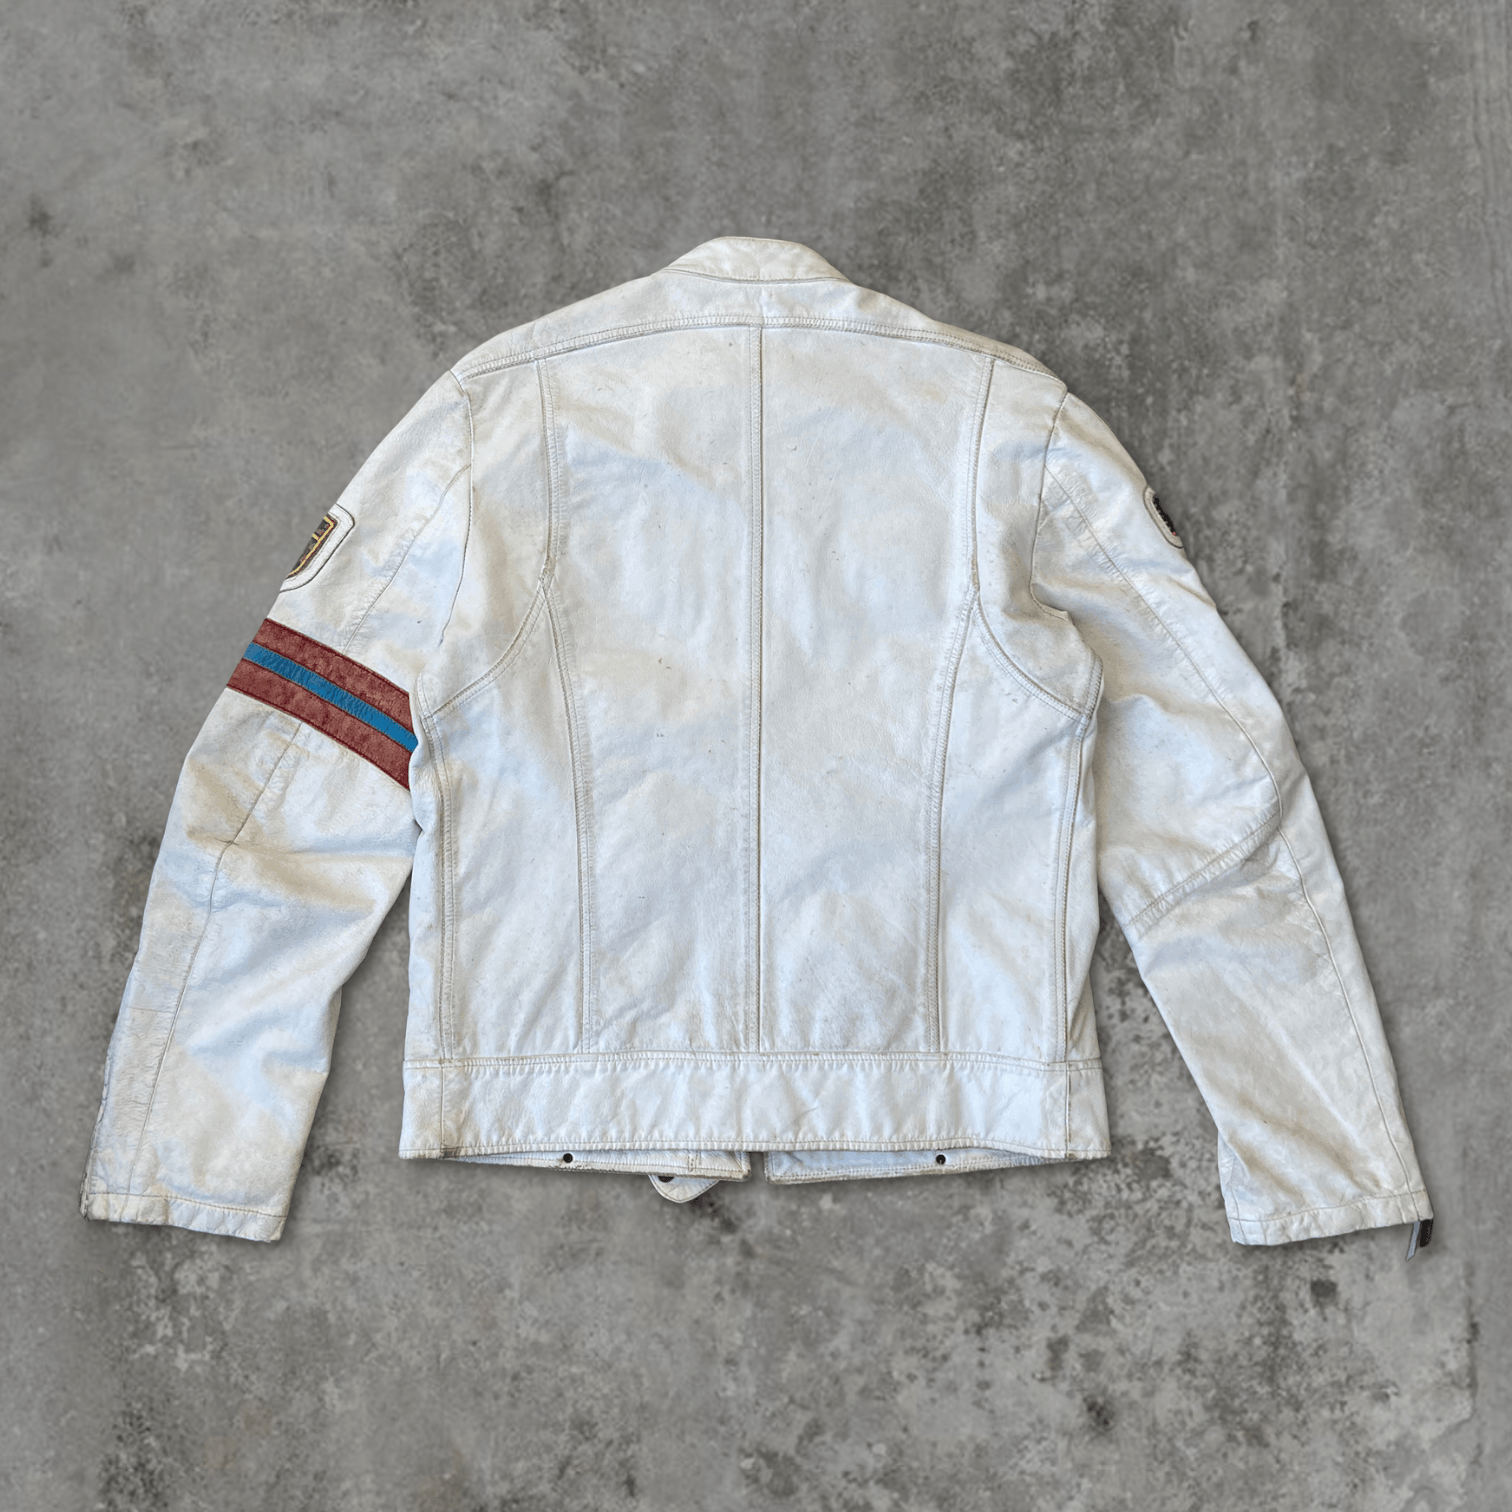 DIESEL WHITE LEATHER RACER JACKET - L - Known Source